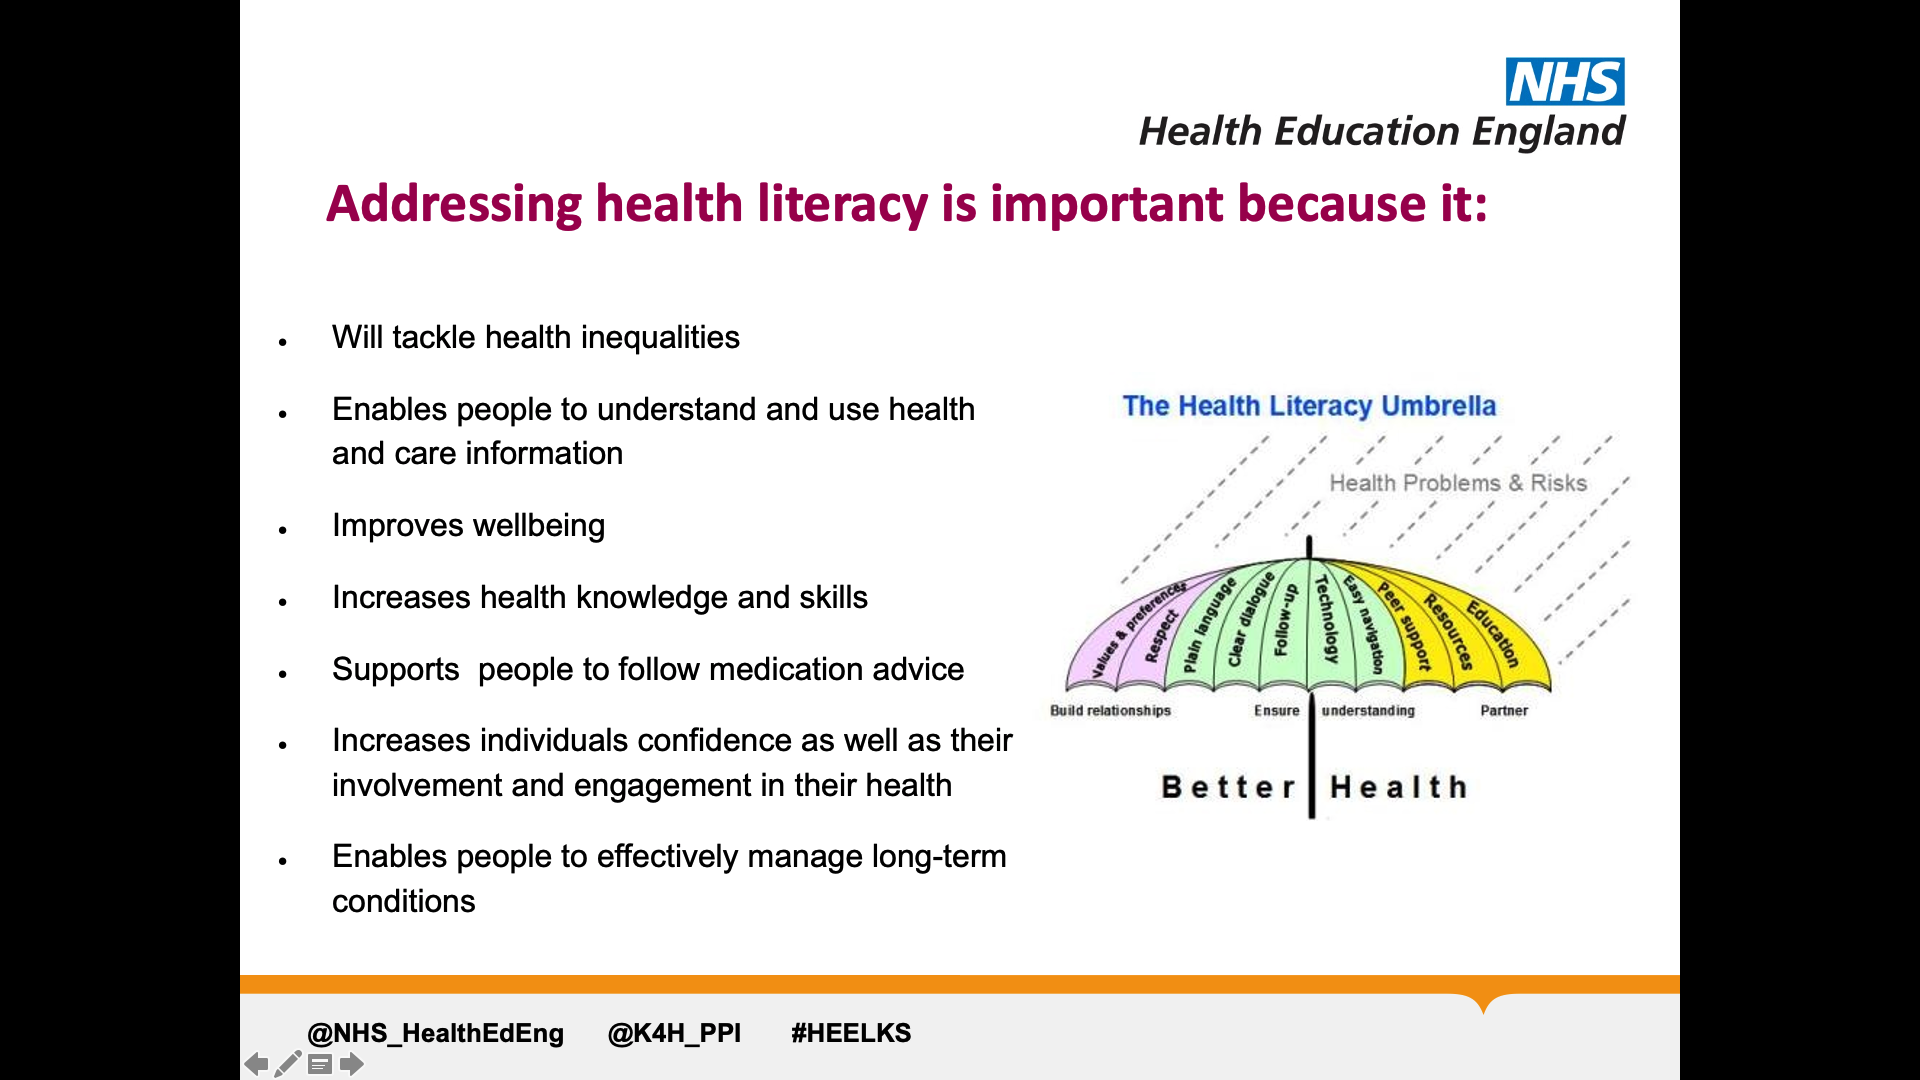 Text on page: Addressing health literacy is important because it: 1. will tackle health inequalities 2. Enables people to understand and use health and care information 3. Improves wellbeing 4. Increases health knowledge and skills 5. Supports  people to follow medication advice 6. Increases individuals confidence as well as their involvement and engagement in their health 7. Enables people to effectively manage long-term conditions